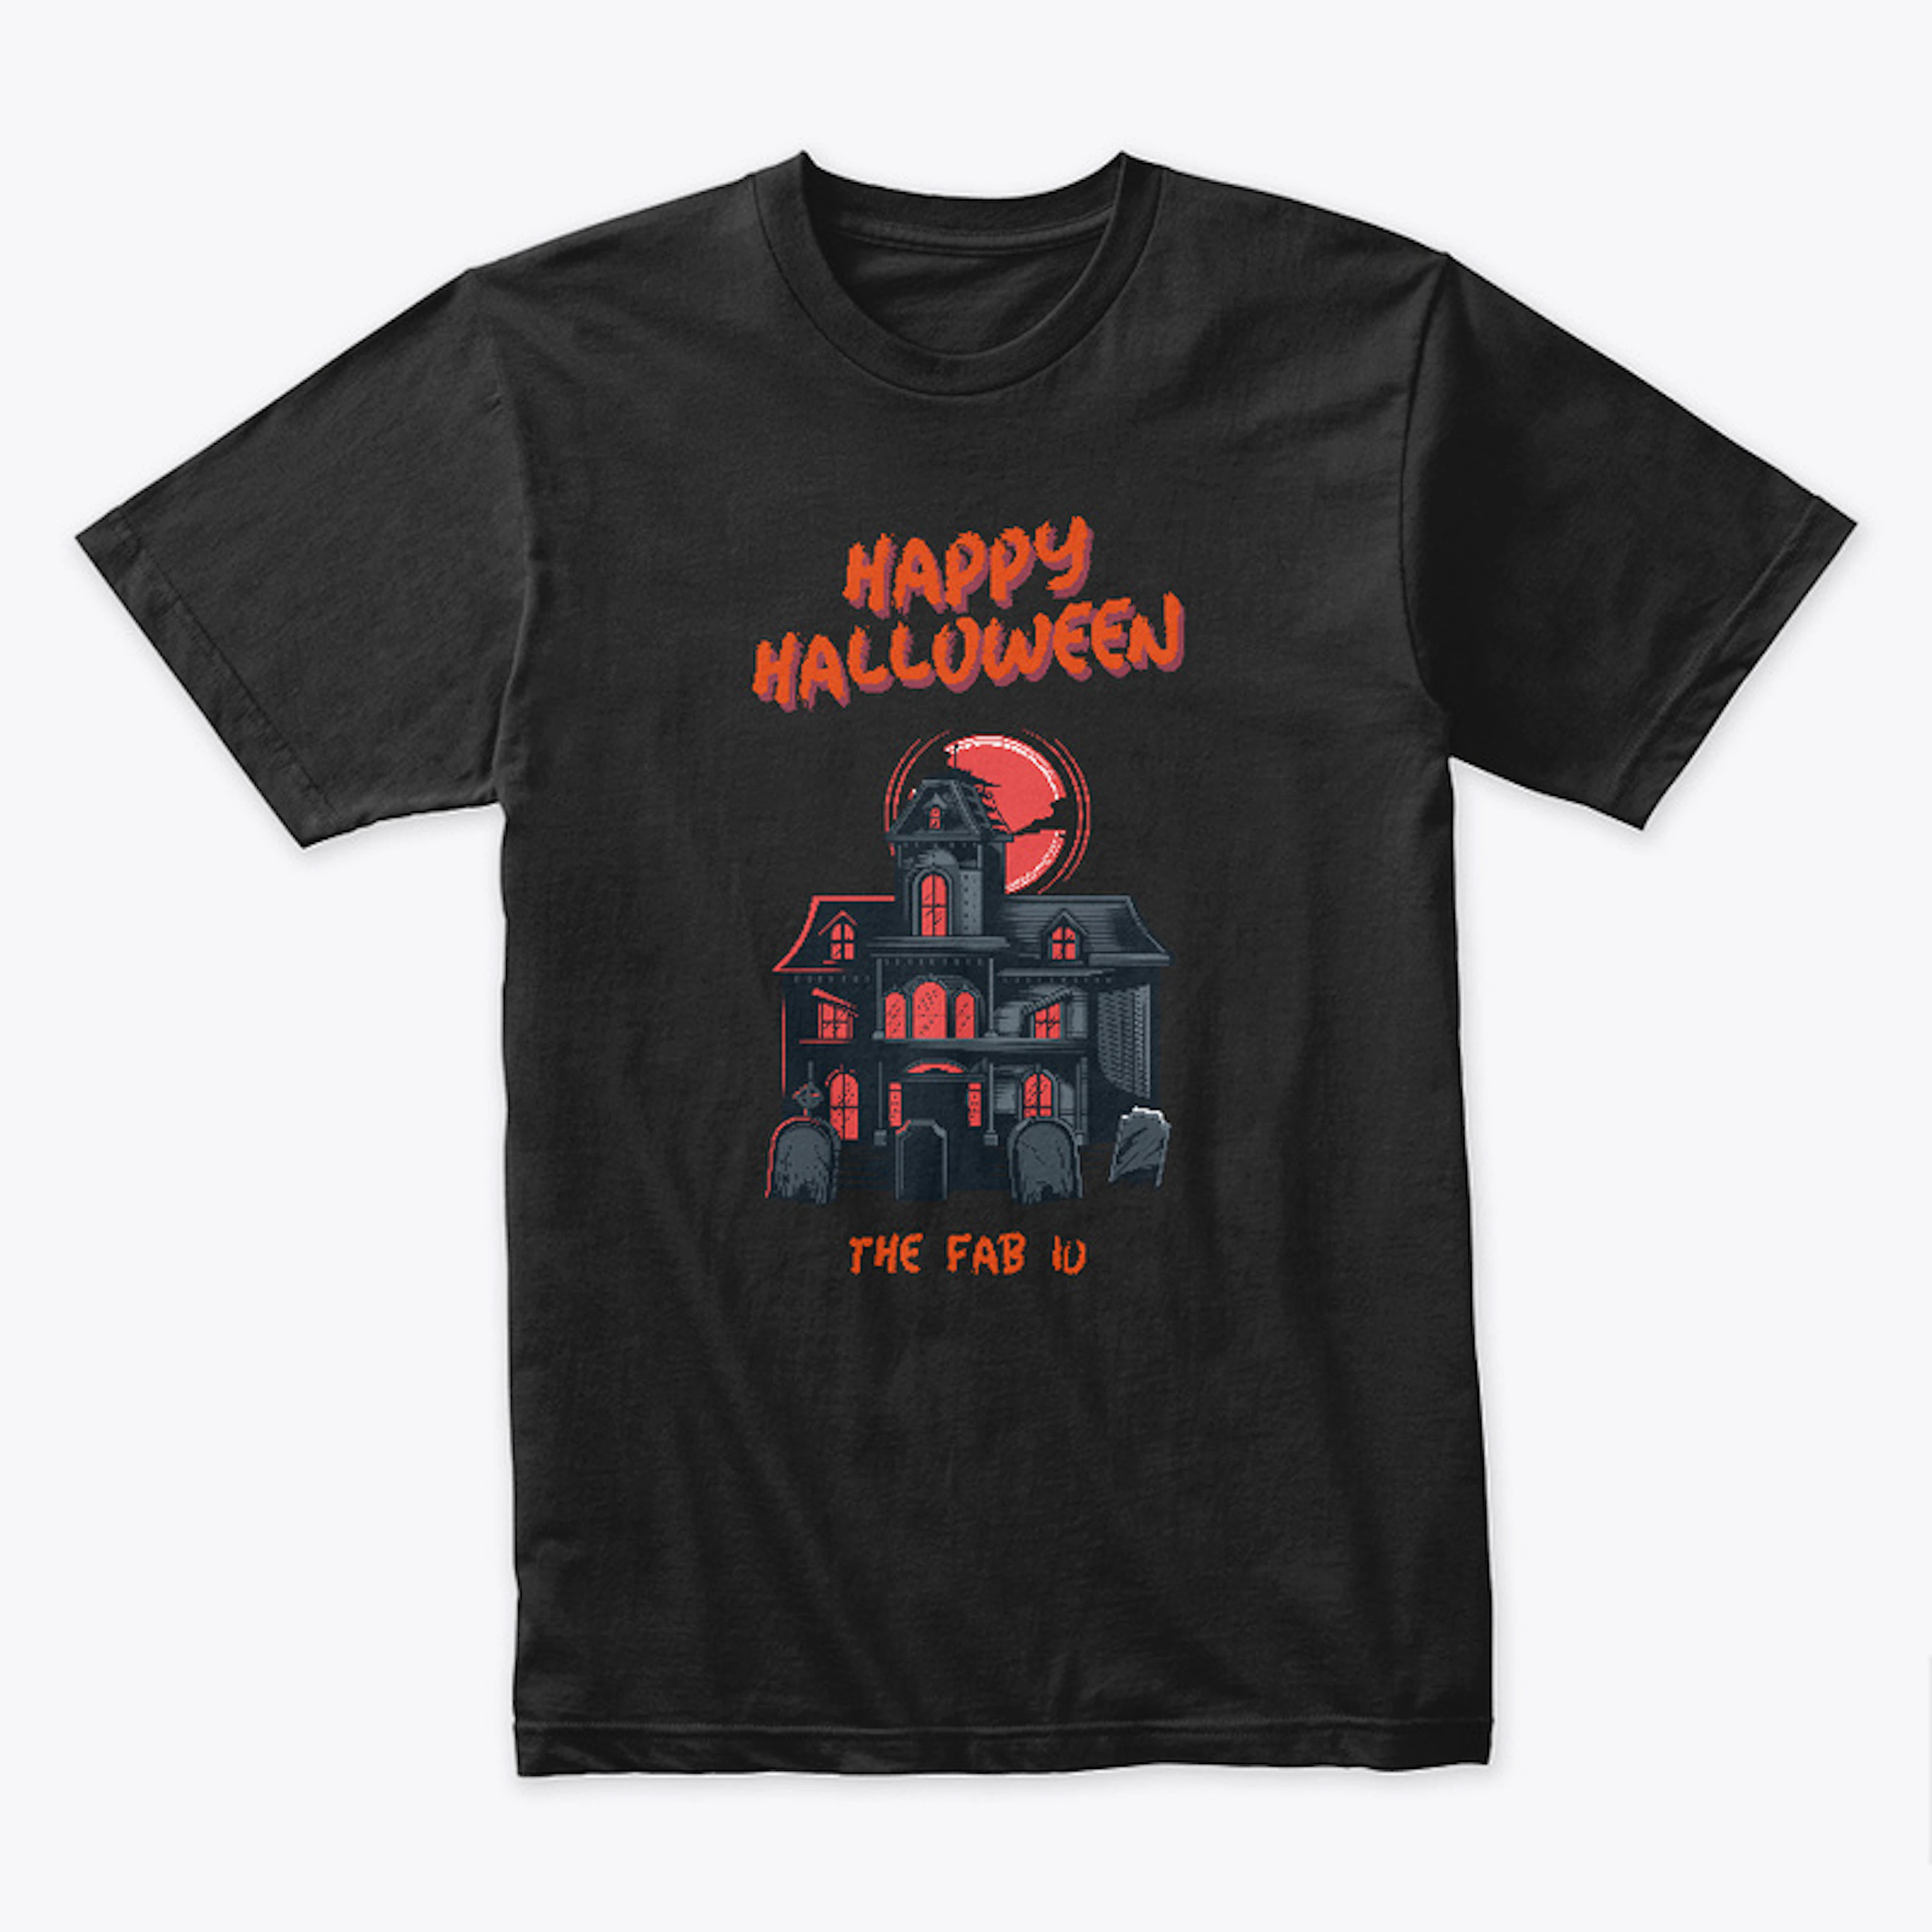 The Fab 10 "Halloween Haunted Mansion"